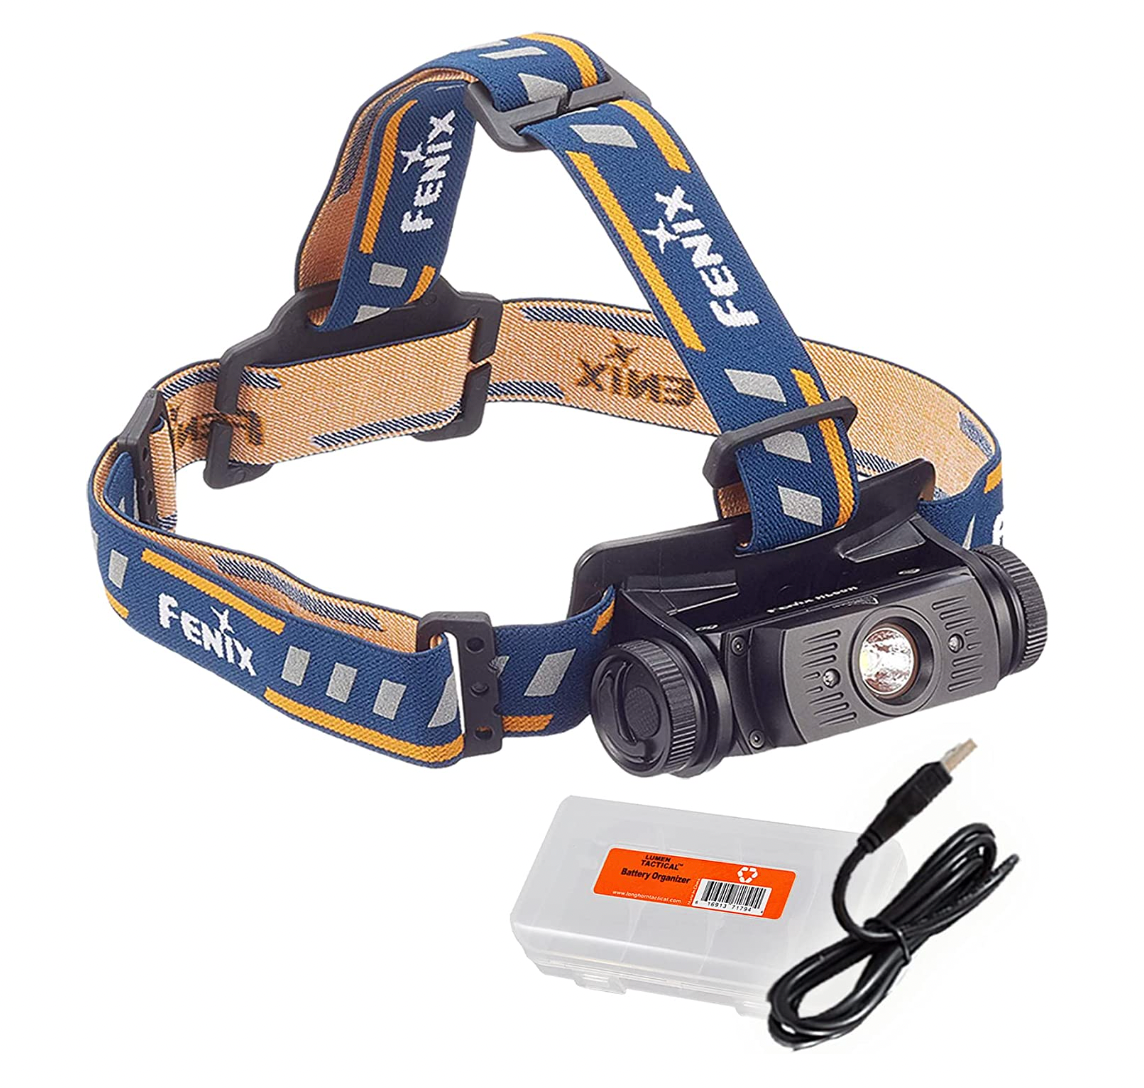 A full shot of a Fenix HL60R headlamp with cable tidy box